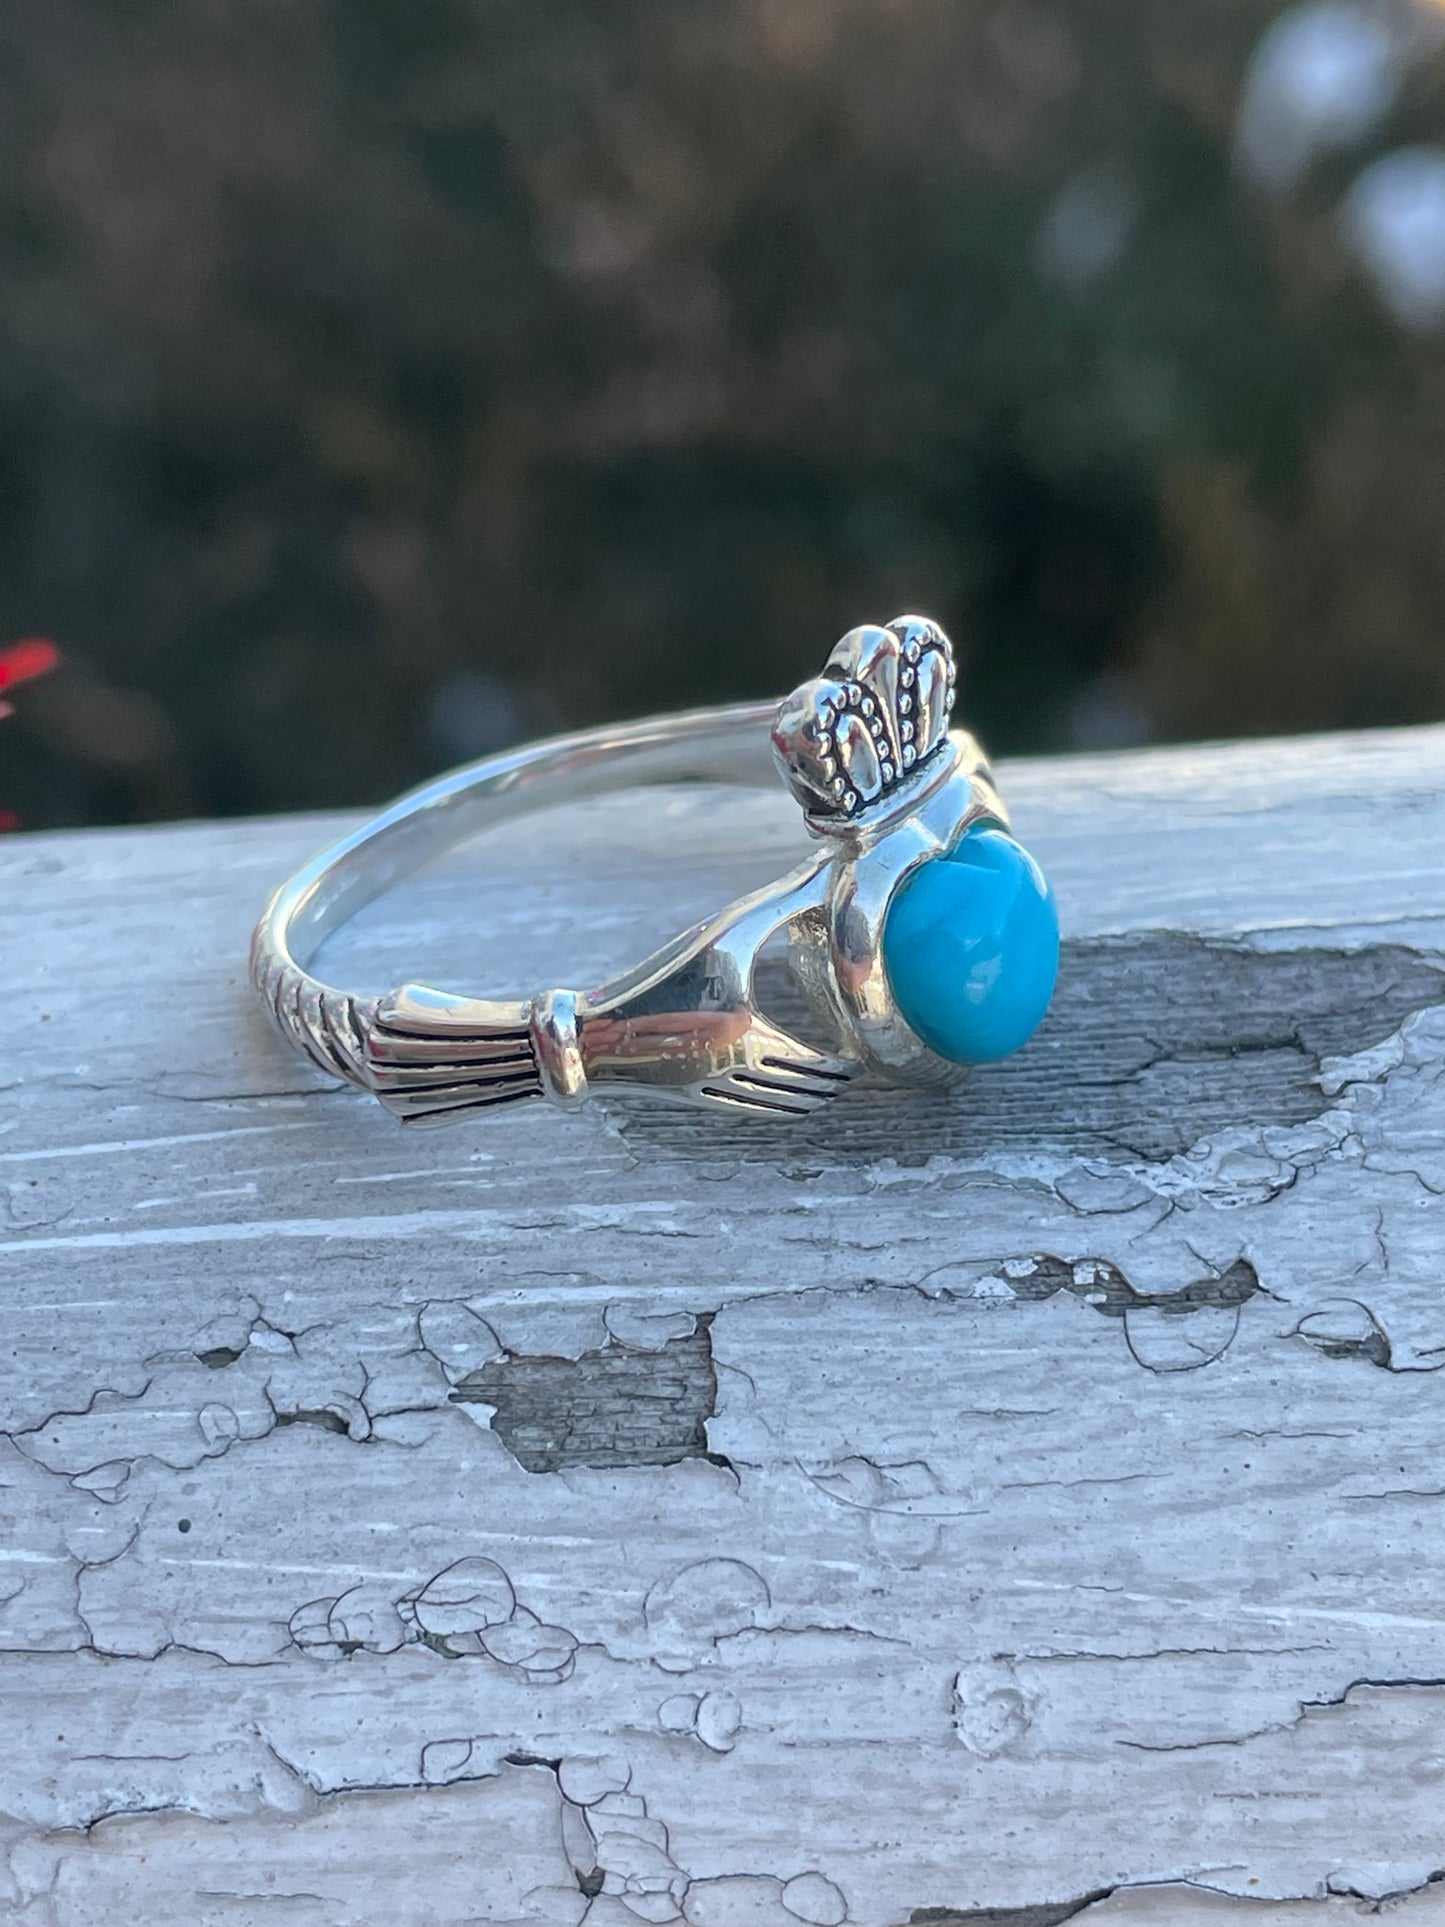 Designer JMH 925 Sterling Silver Sleeping Beauty Turquoise Claddagh Ring